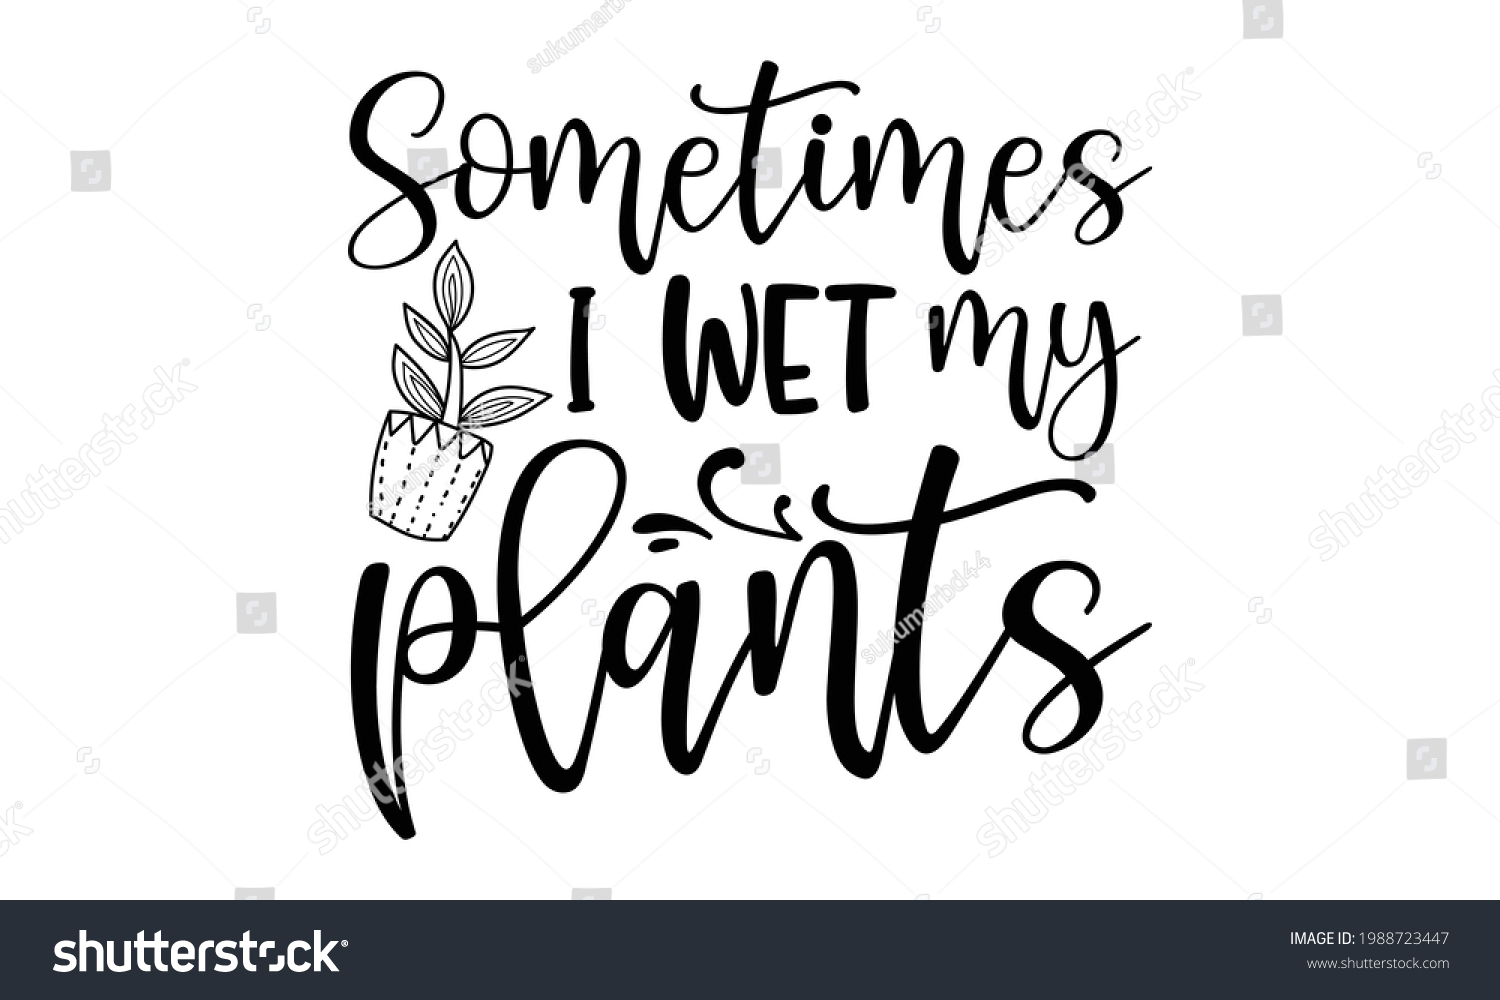 SVG of Sometimes I wet my plants - Gardening t shirts design, Hand drawn lettering phrase, Calligraphy t shirt design, Isolated on white background, svg Files for Cutting Cricut and Silhouette, EPS 10 svg